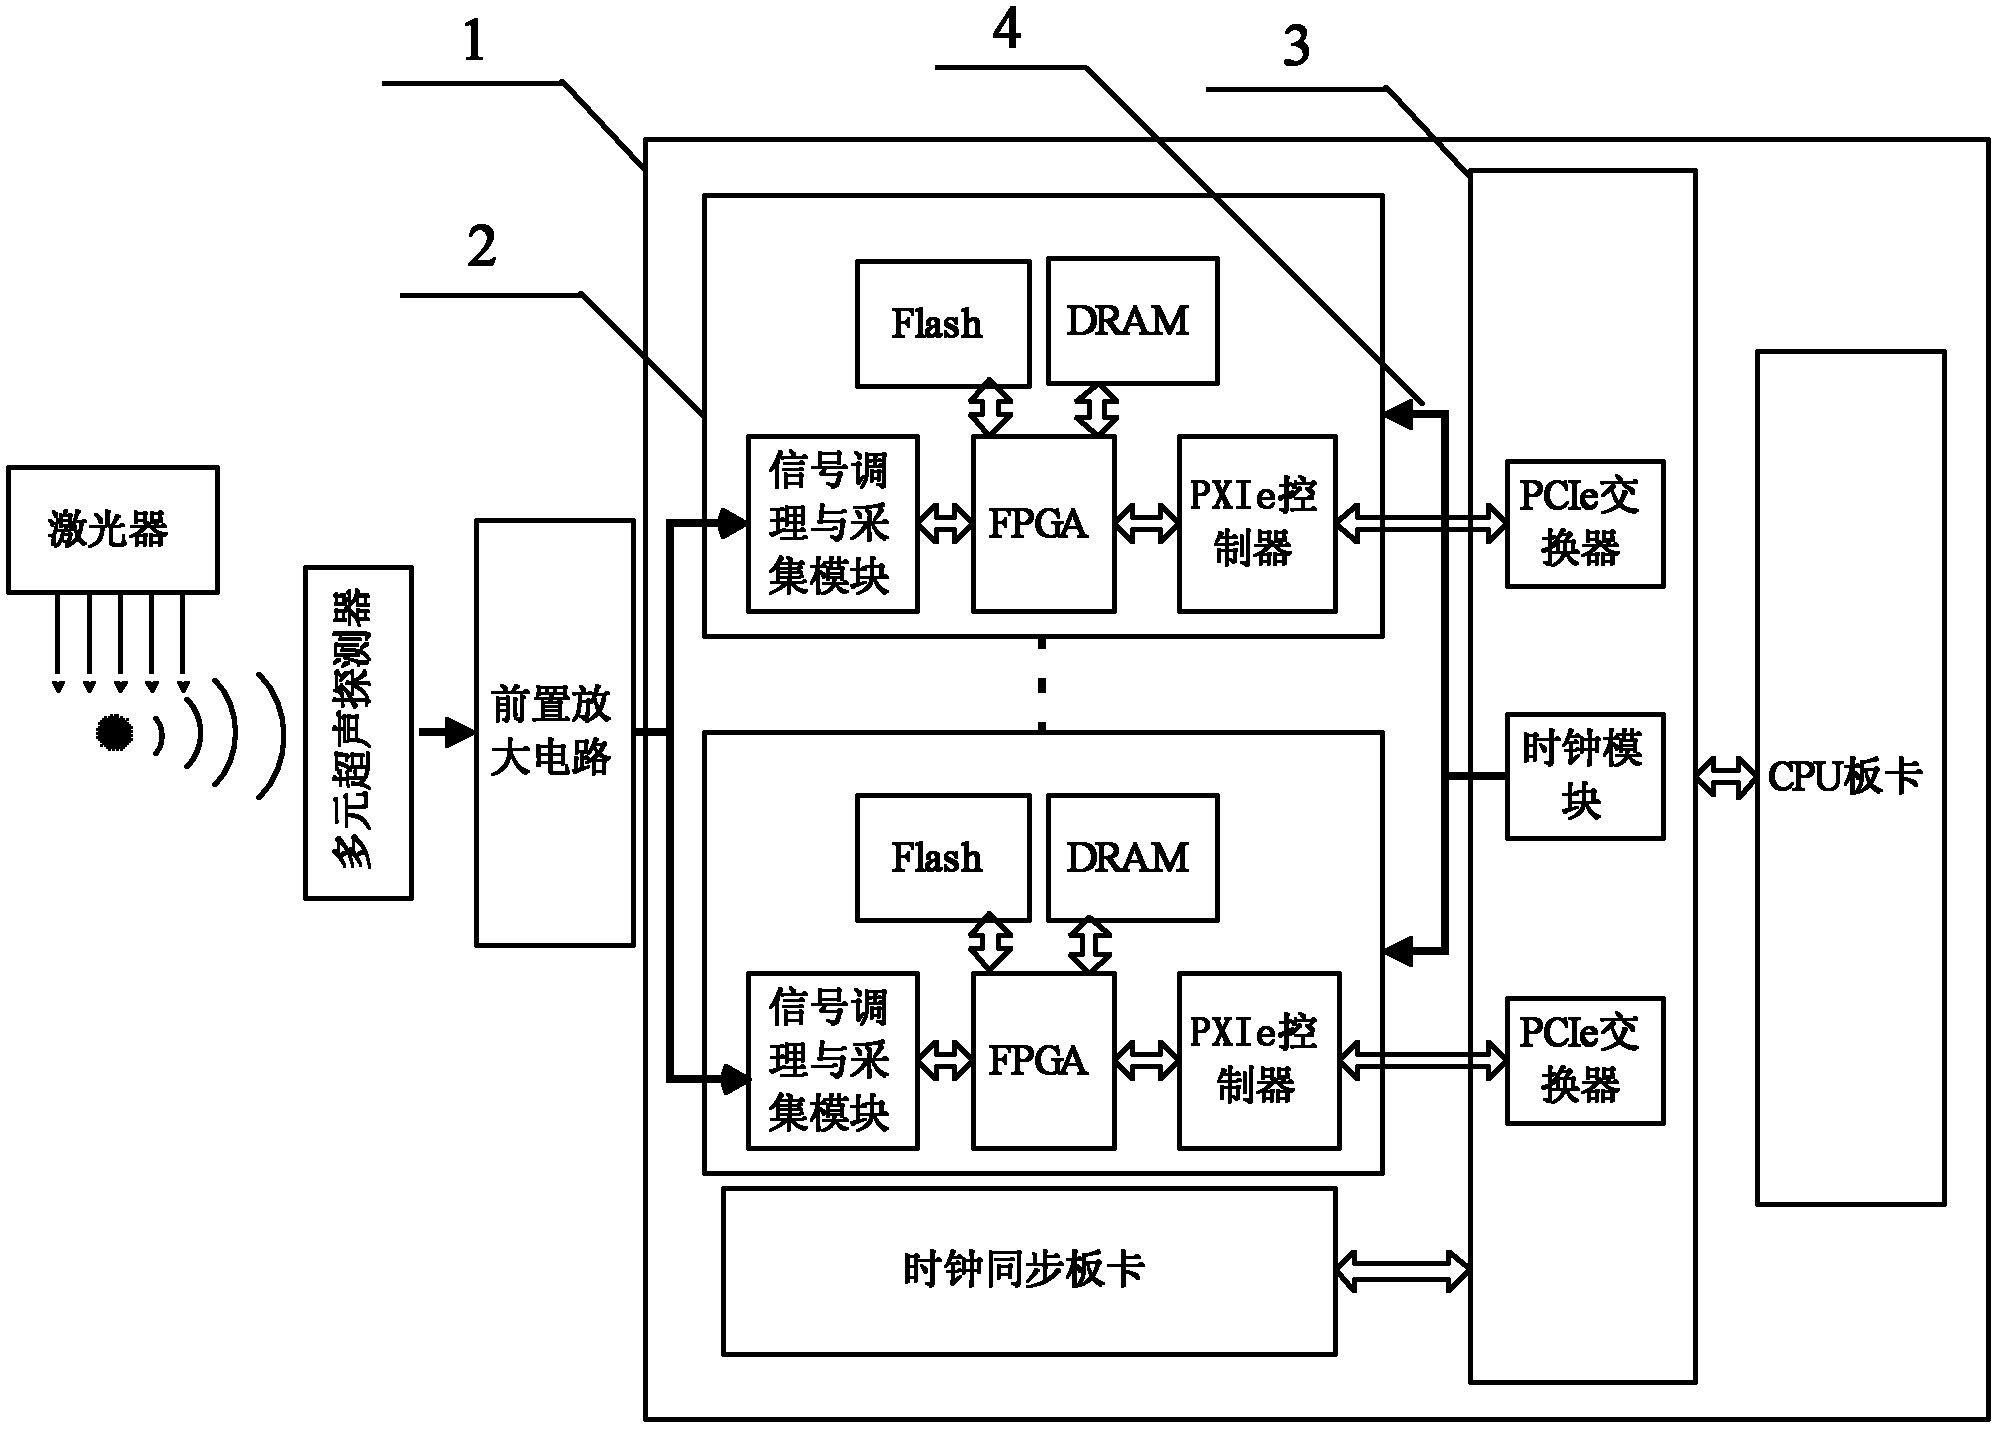 Multichannel synchronous real-time digitalized photoacoustic imaging device and method